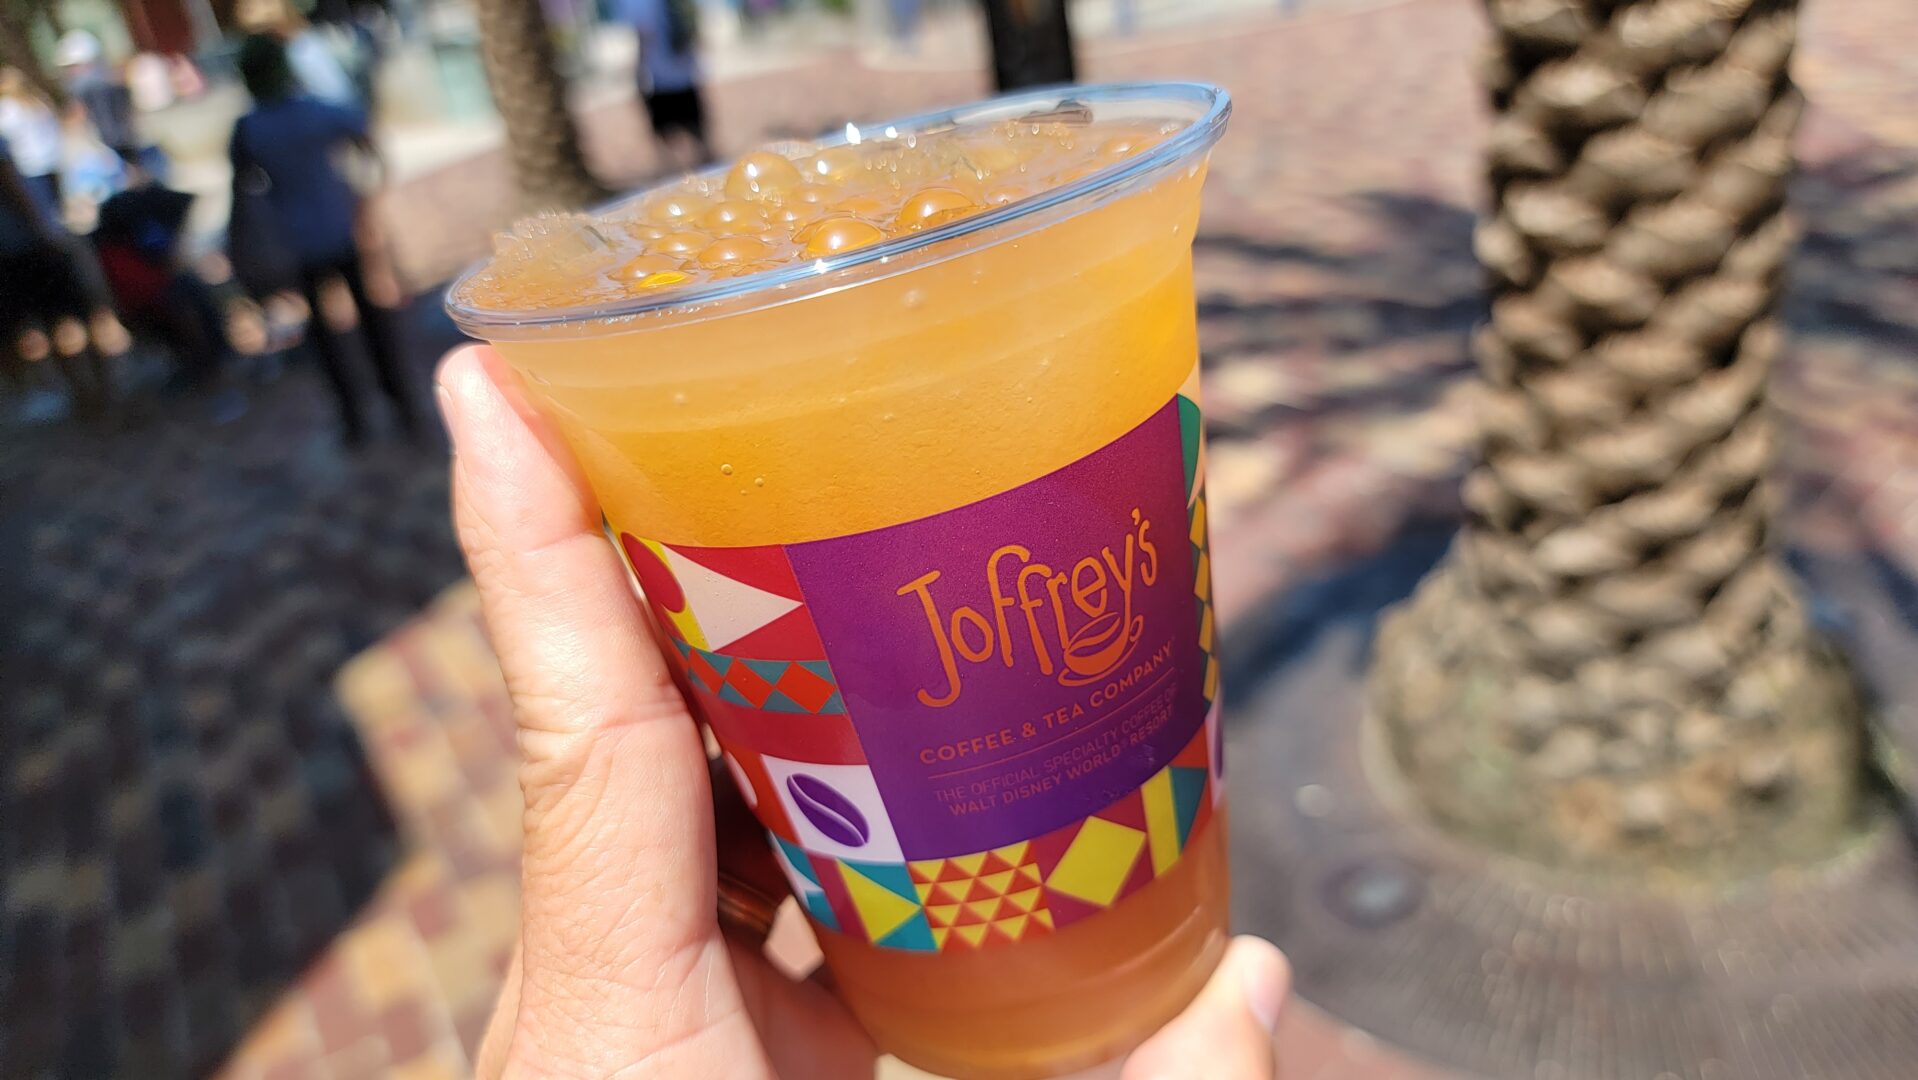 Review: New Frozen Mandarin Fusion at Joffrey’s Coffee in Disney Springs